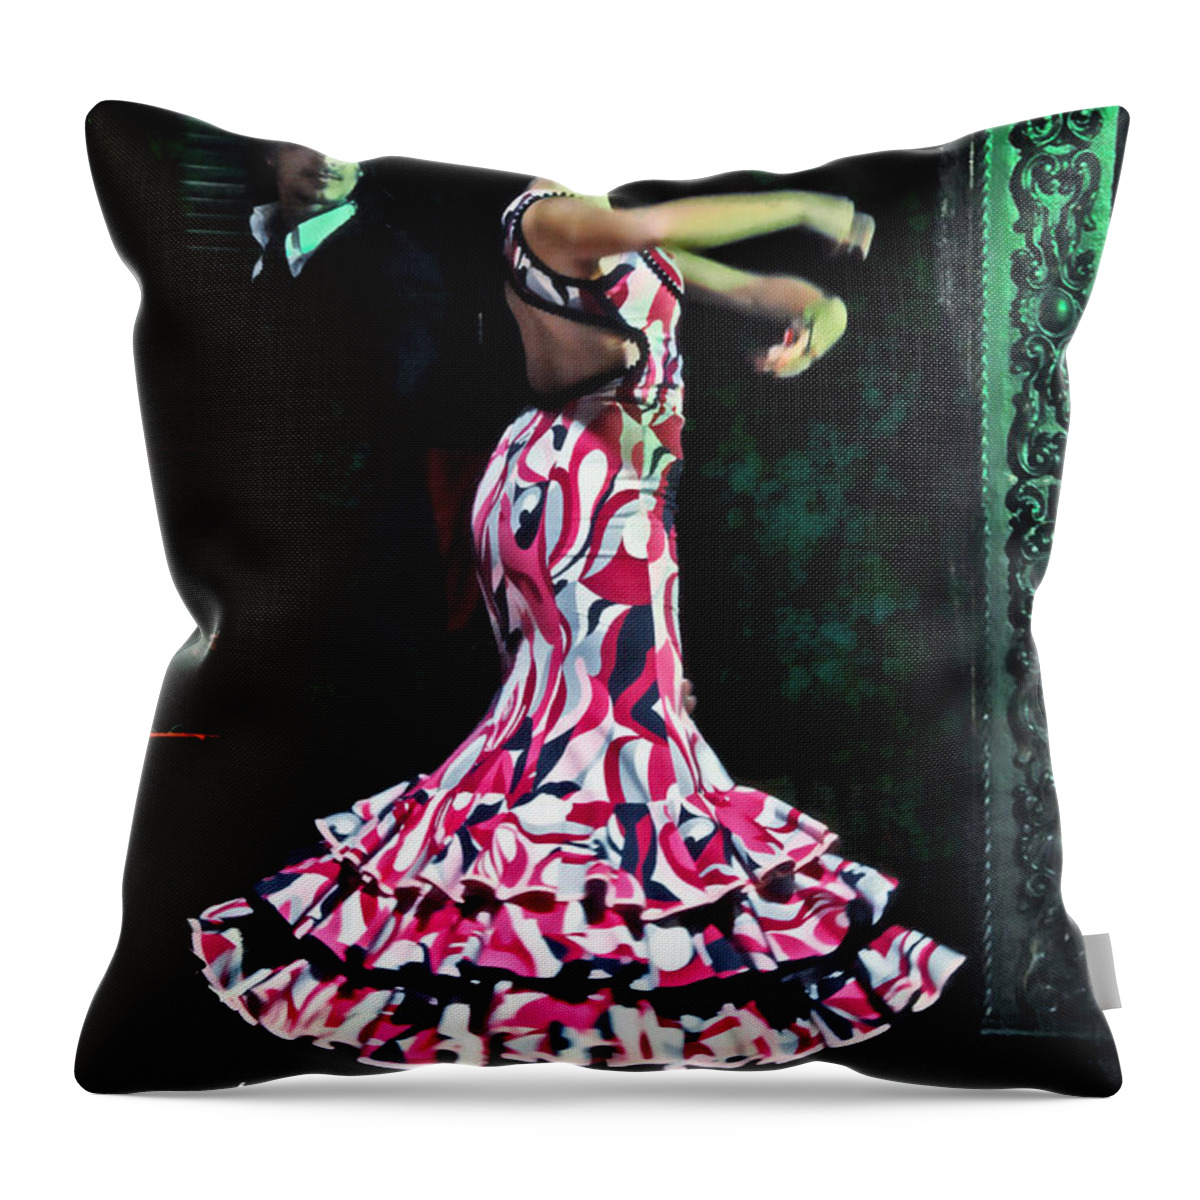 Flamenco Throw Pillow featuring the photograph Flamenco Series No. 10 by Mary Machare